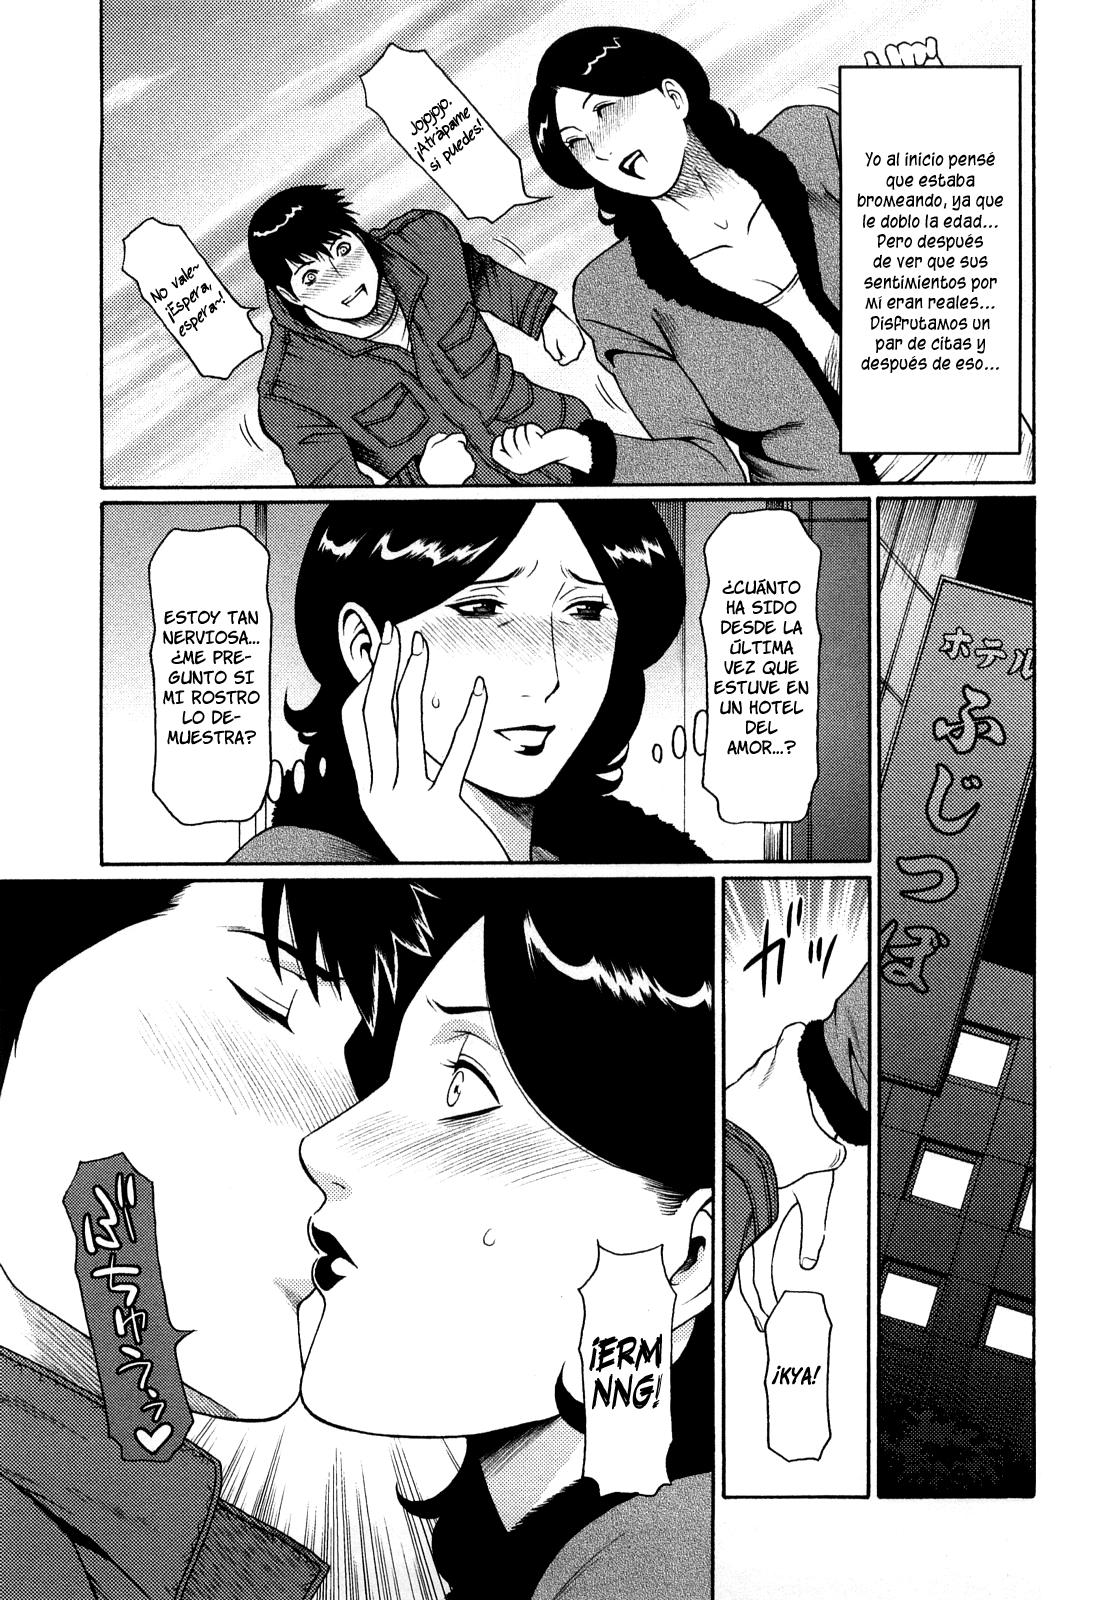 Immorality Love-Hole Completo (Sin Censura) Chapter-11 - 2